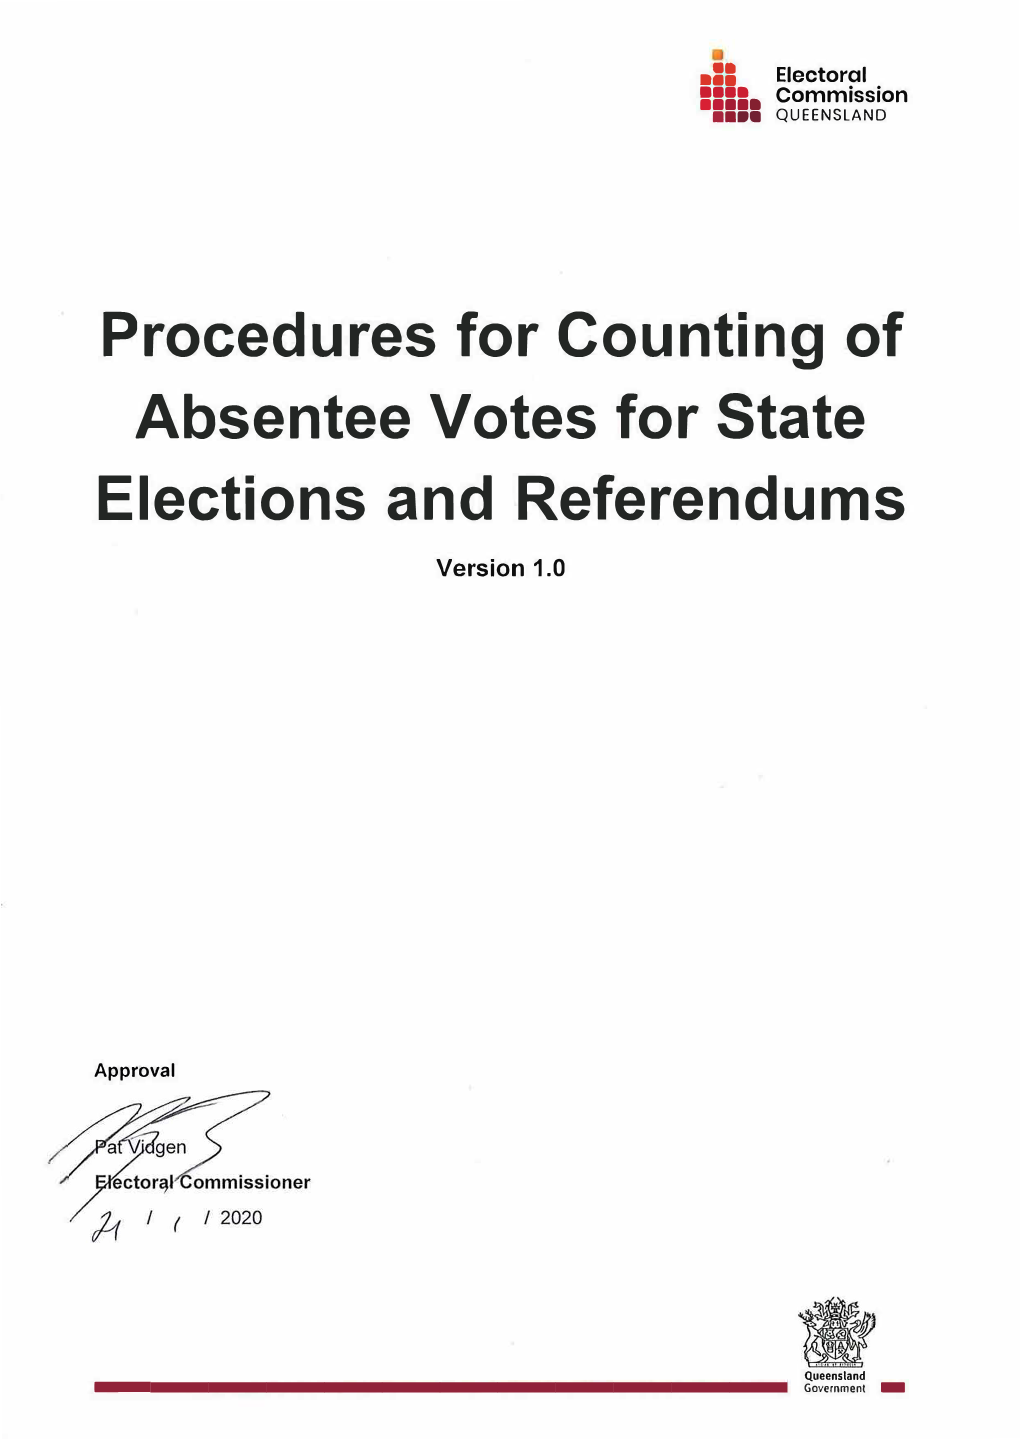 Procedures for Counting of Absentee Votes for State Elections and Referendums Version 1.0